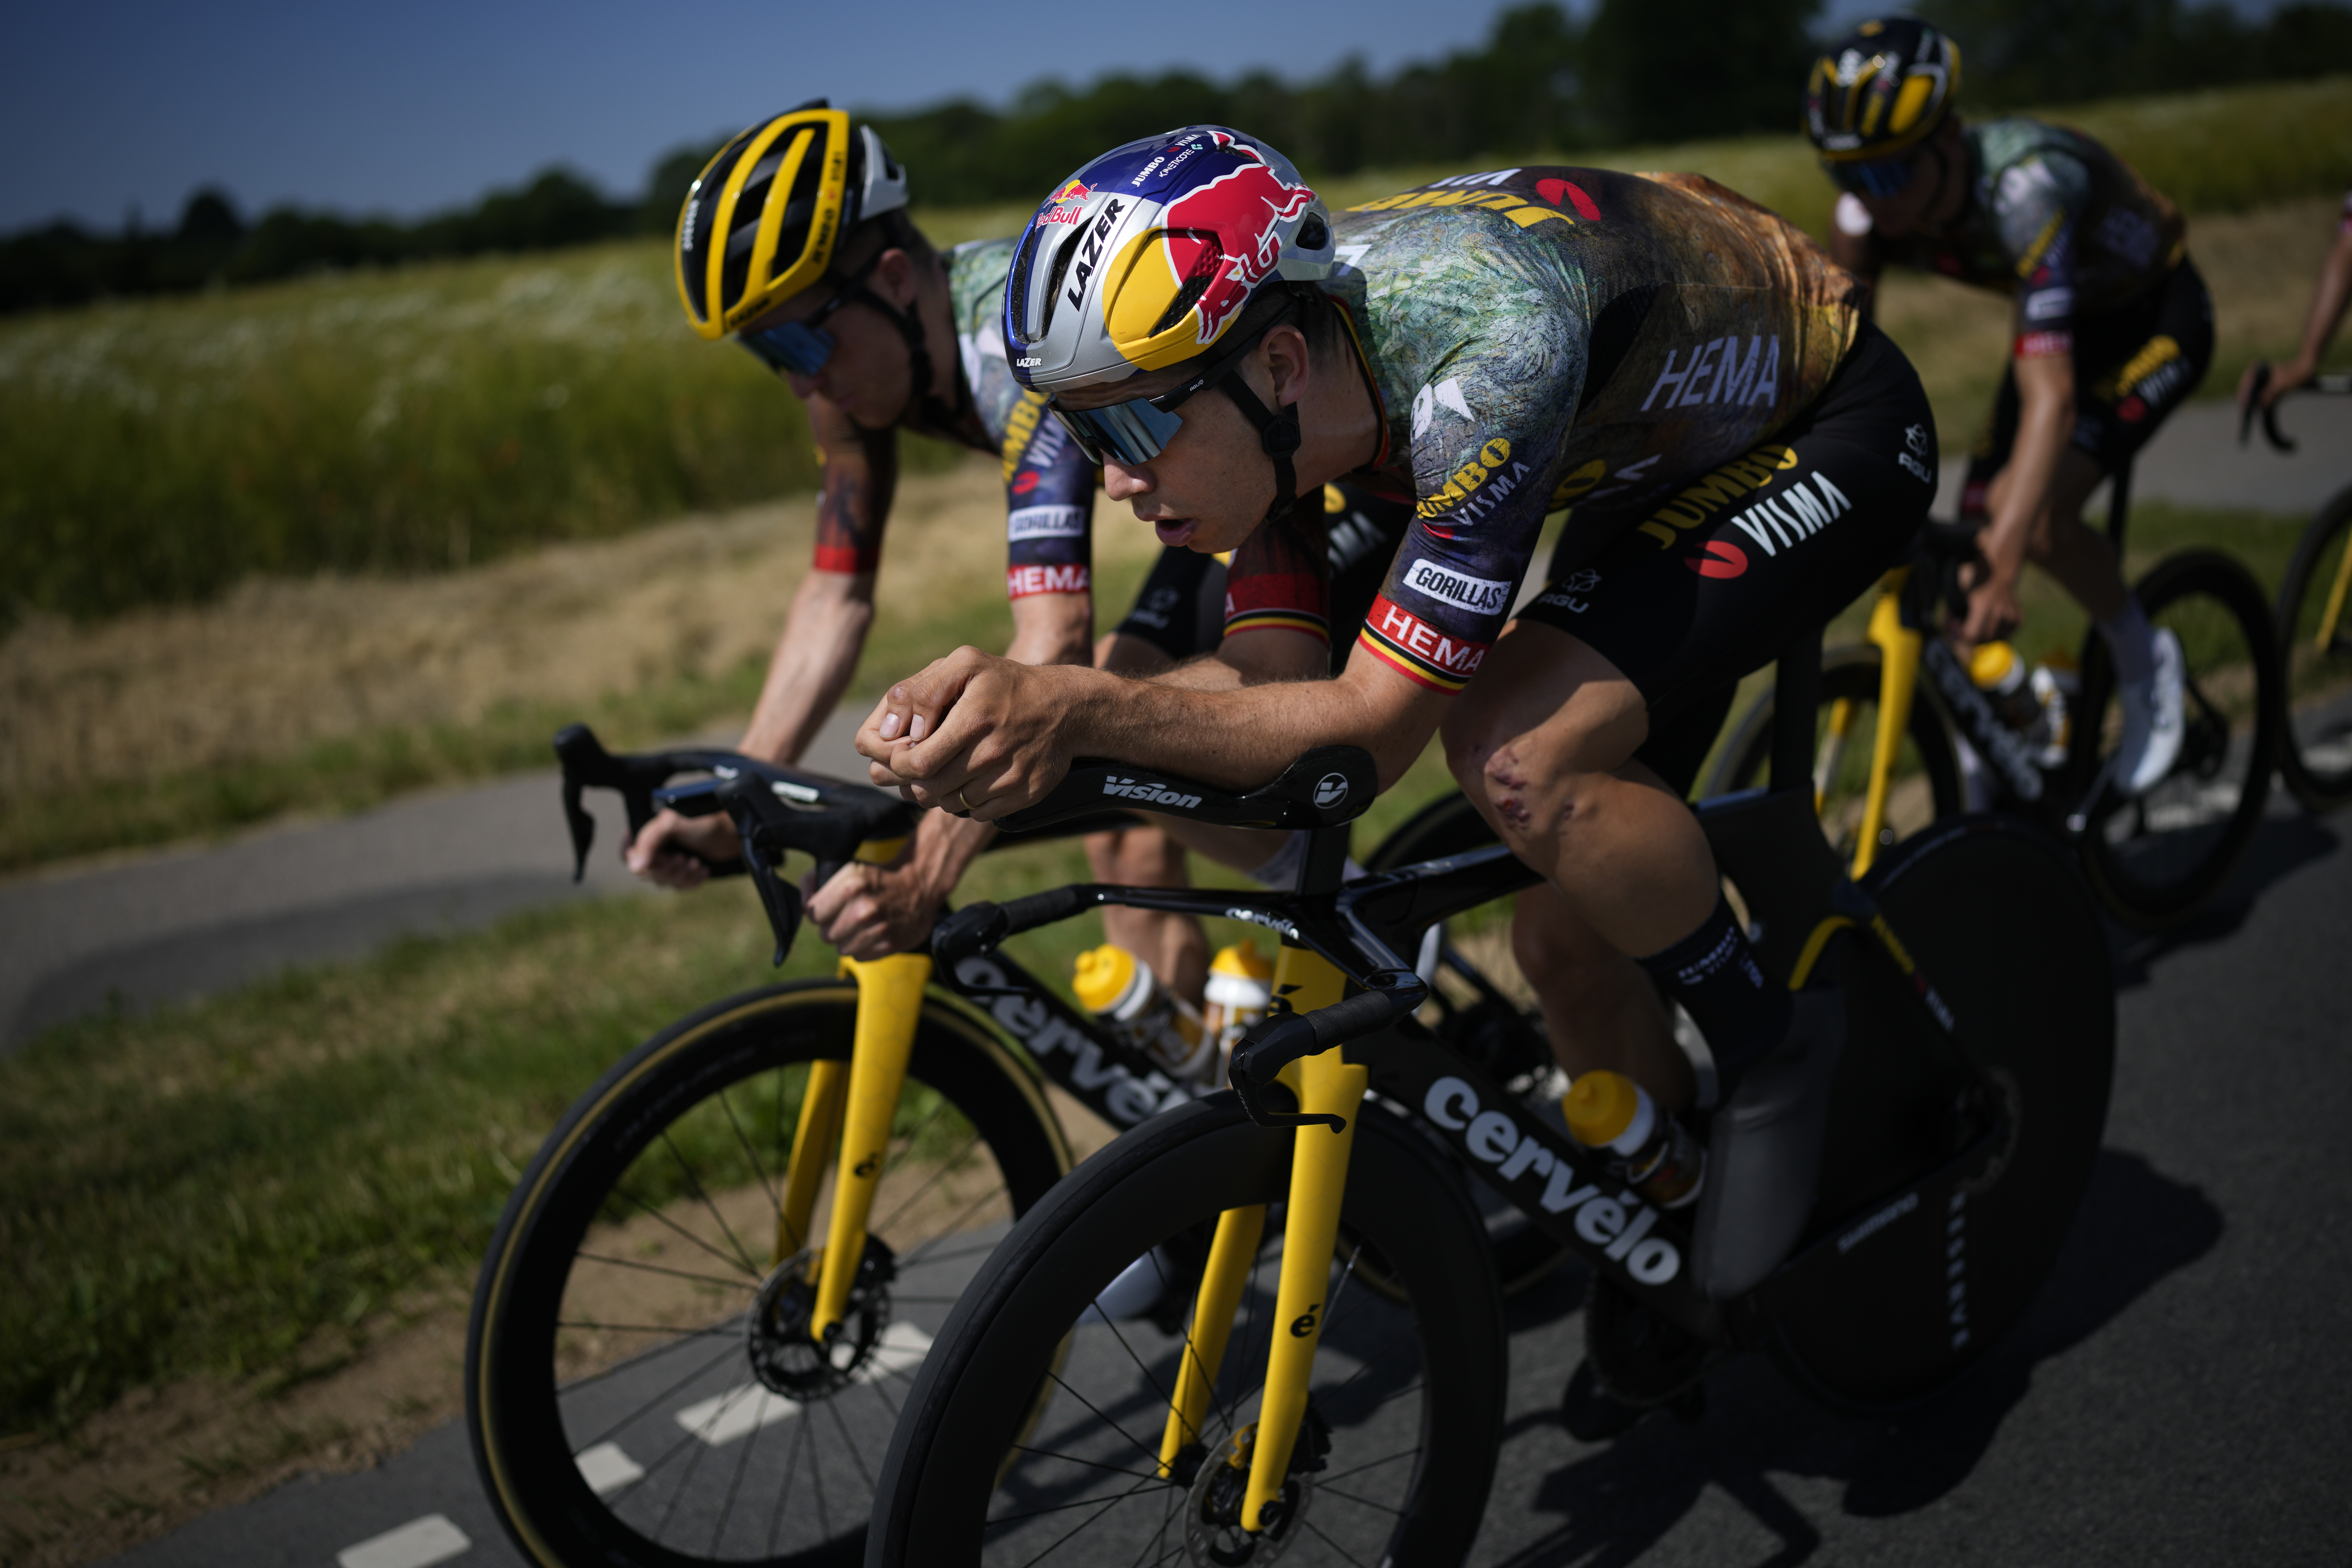 How to watch Tour de France (7/1/22) Free live stream of Stage 1 action